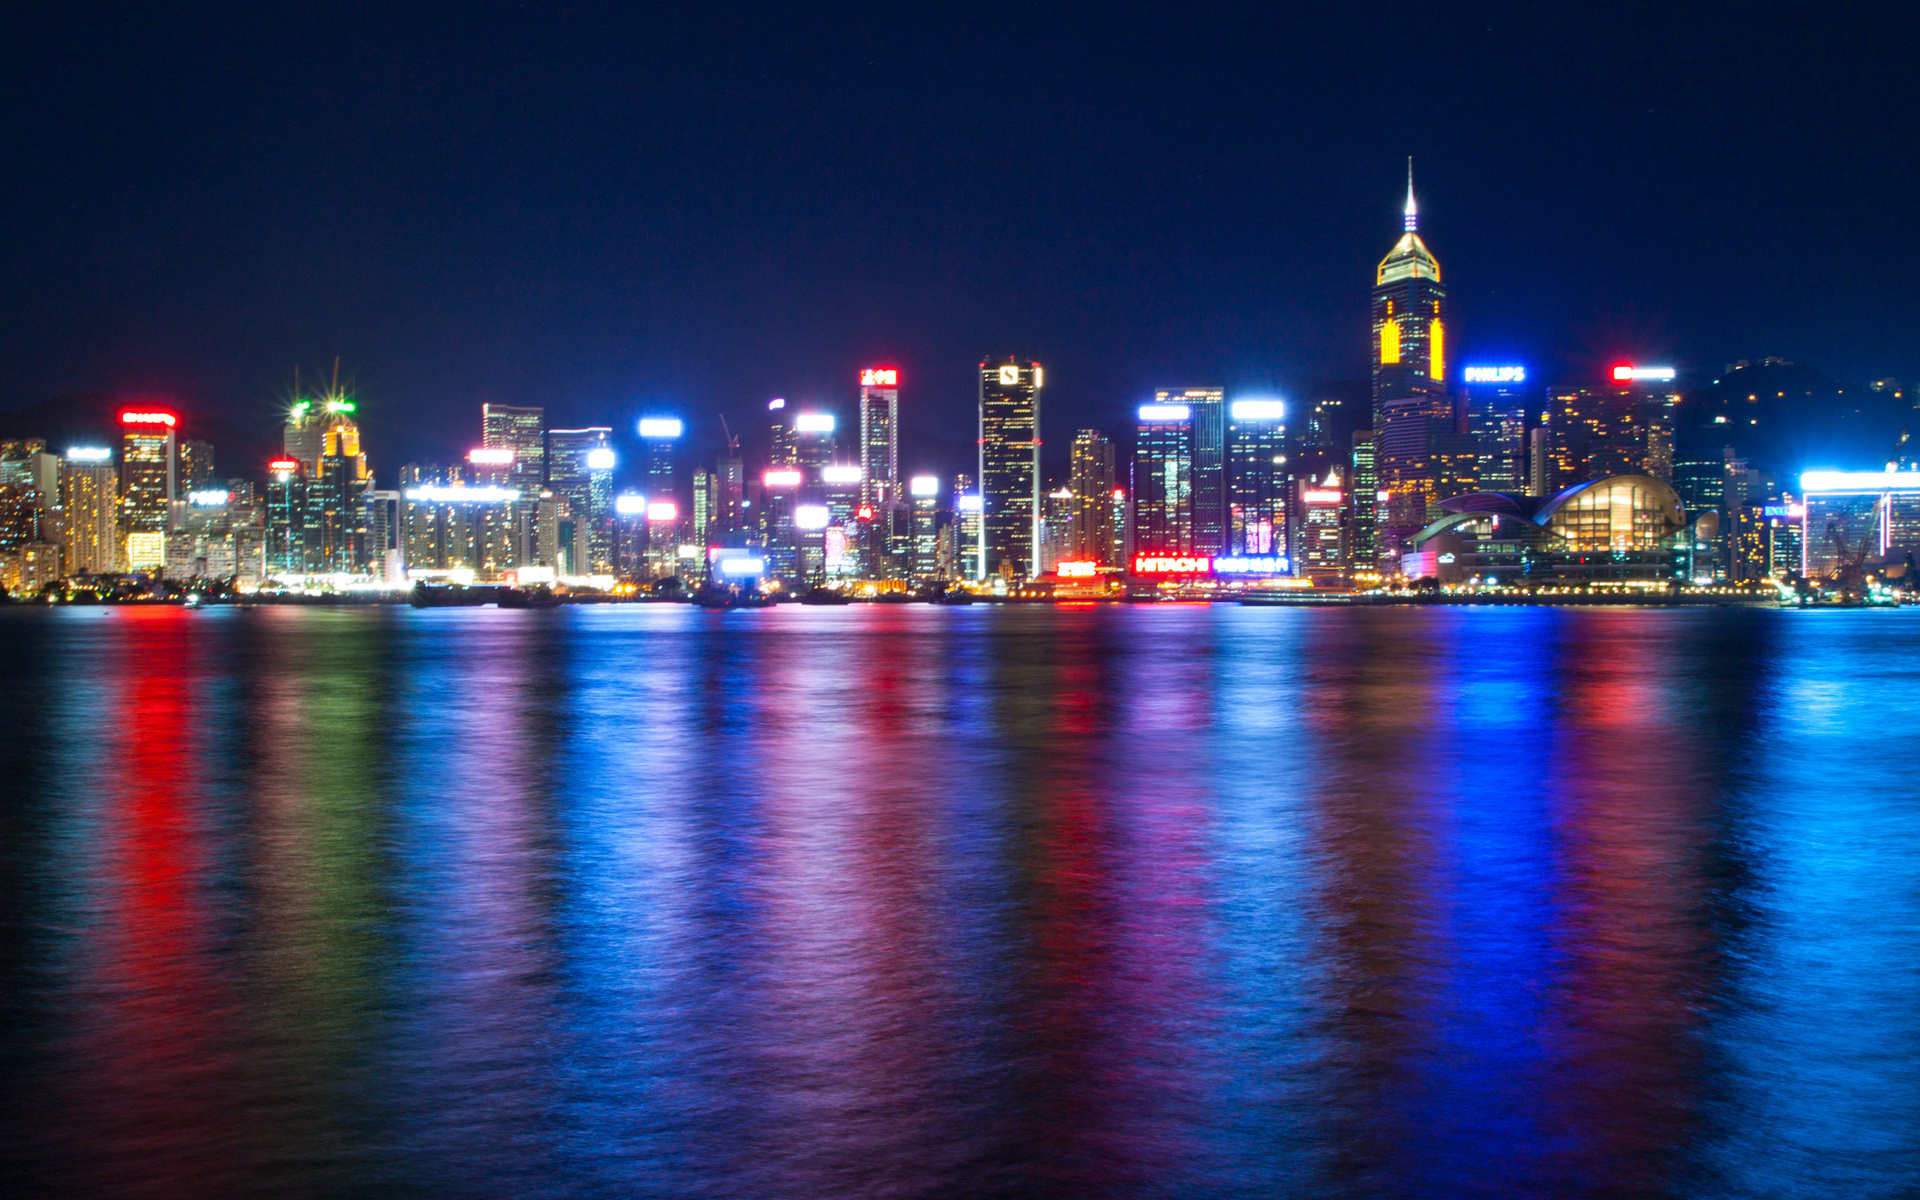 hong, Kong, Harbour, China, Harbor, Hdr, Water, Reflection, Color, Skyline, Cities, City, Scape, Night, Lights, Architecture, Buildings, Skyscrapers, Sky, Scenic, View, Panorama Wallpaper